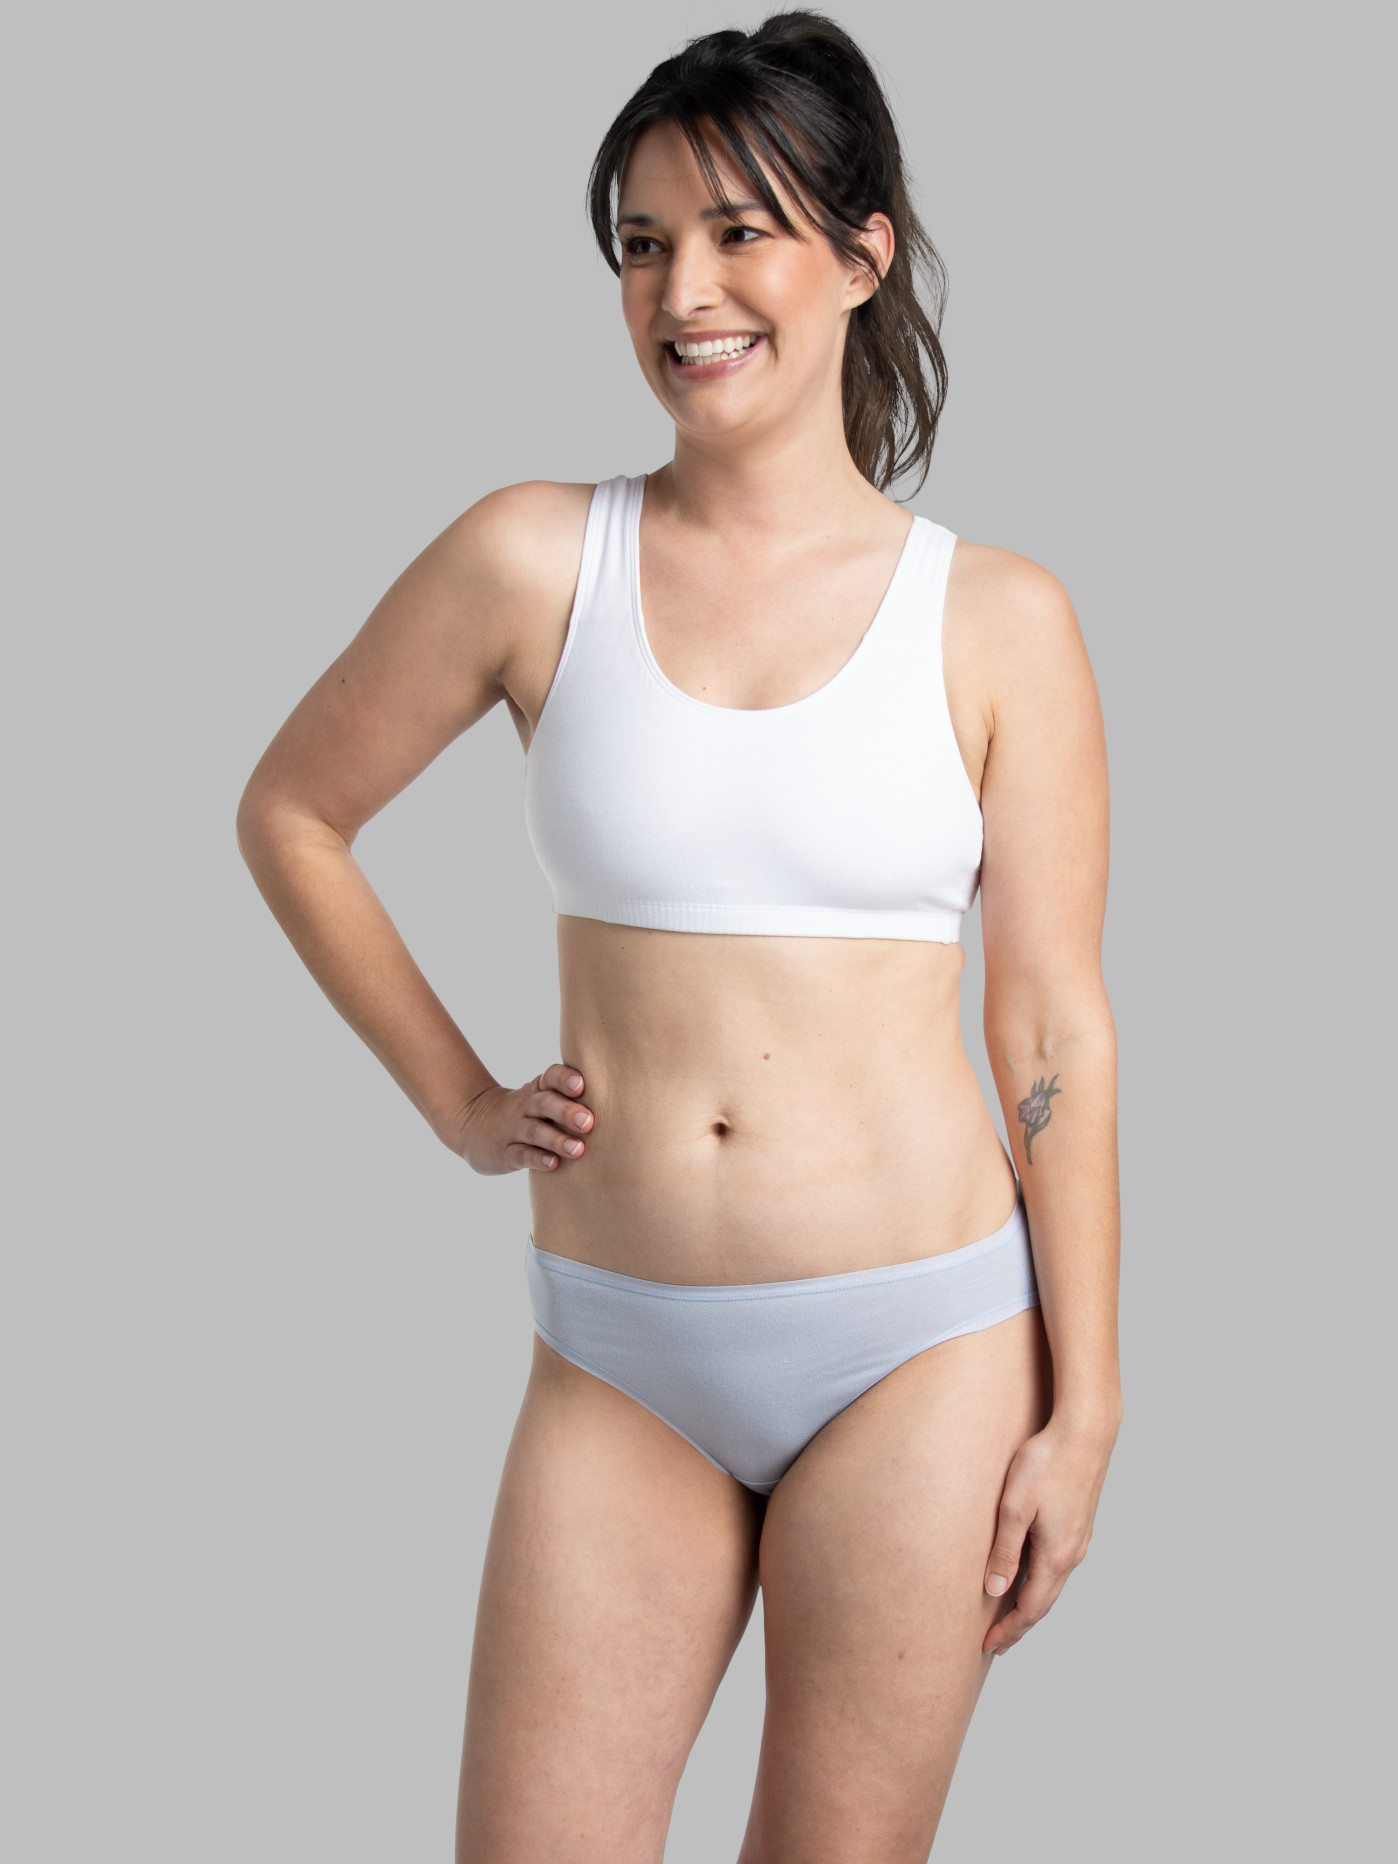 Fruit of the Loom Women Underwear- Hipsters, Briefs, Bikinis and